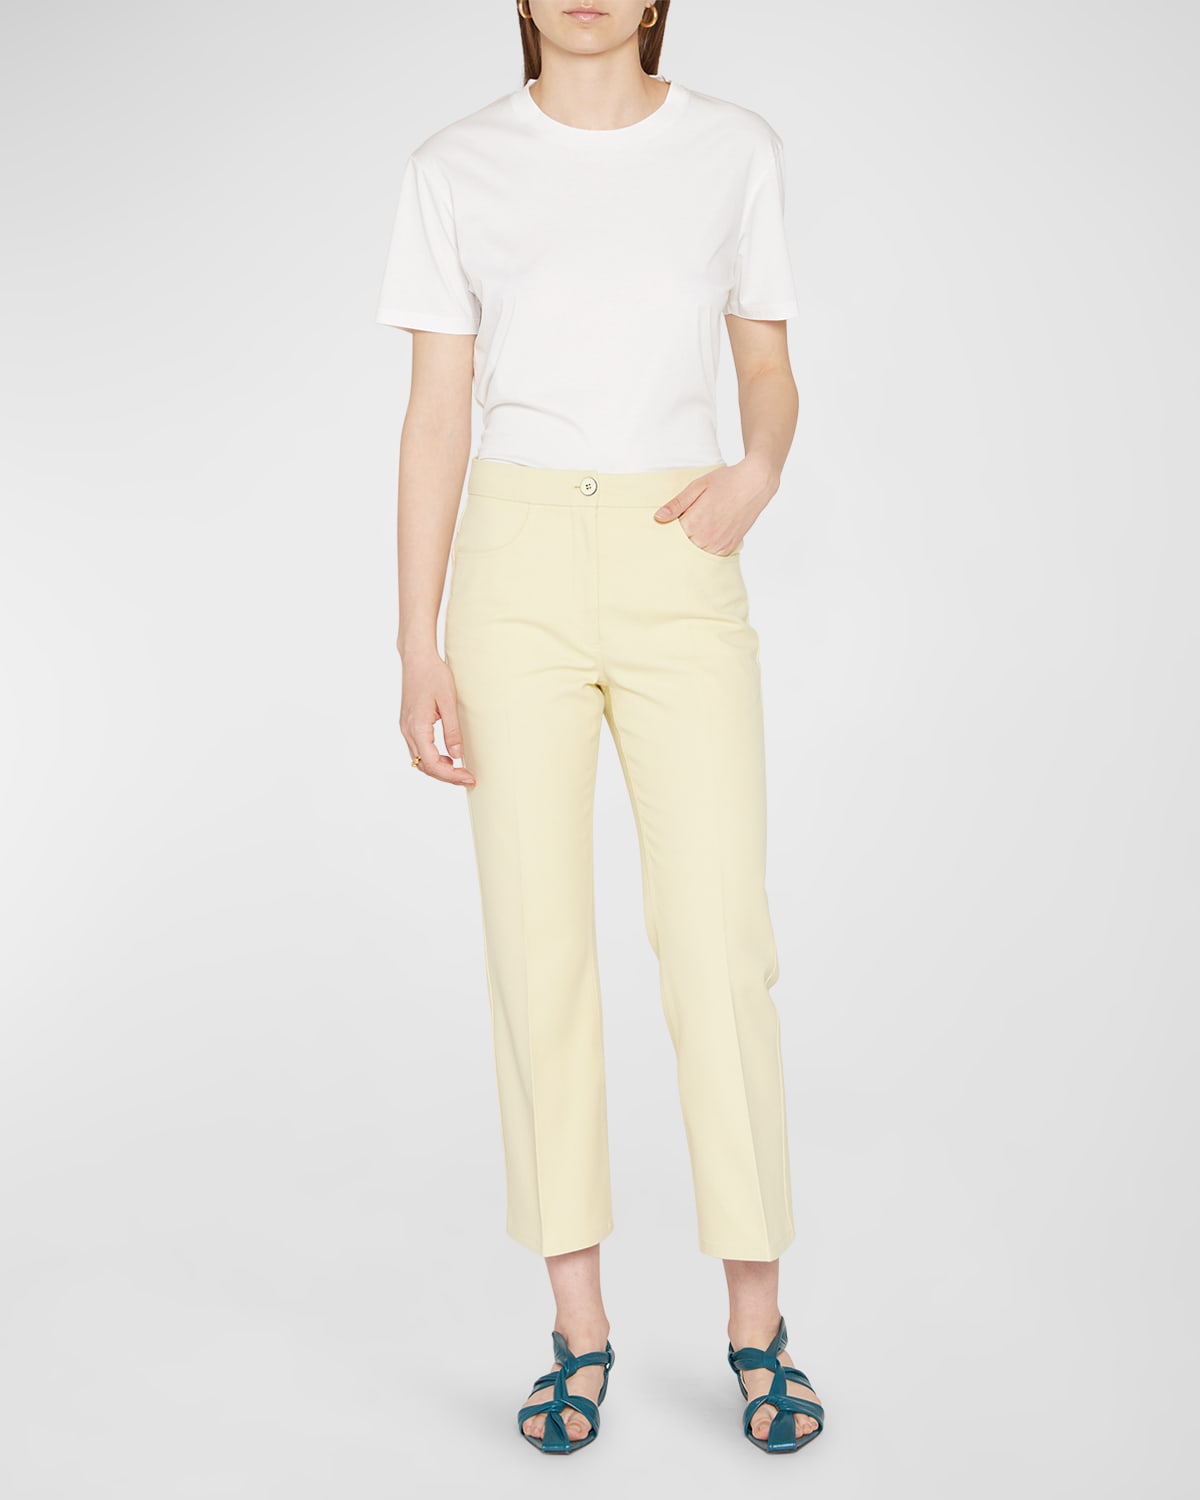 Jil Sander Cropped Flared Cotton Pants In Lime Wash